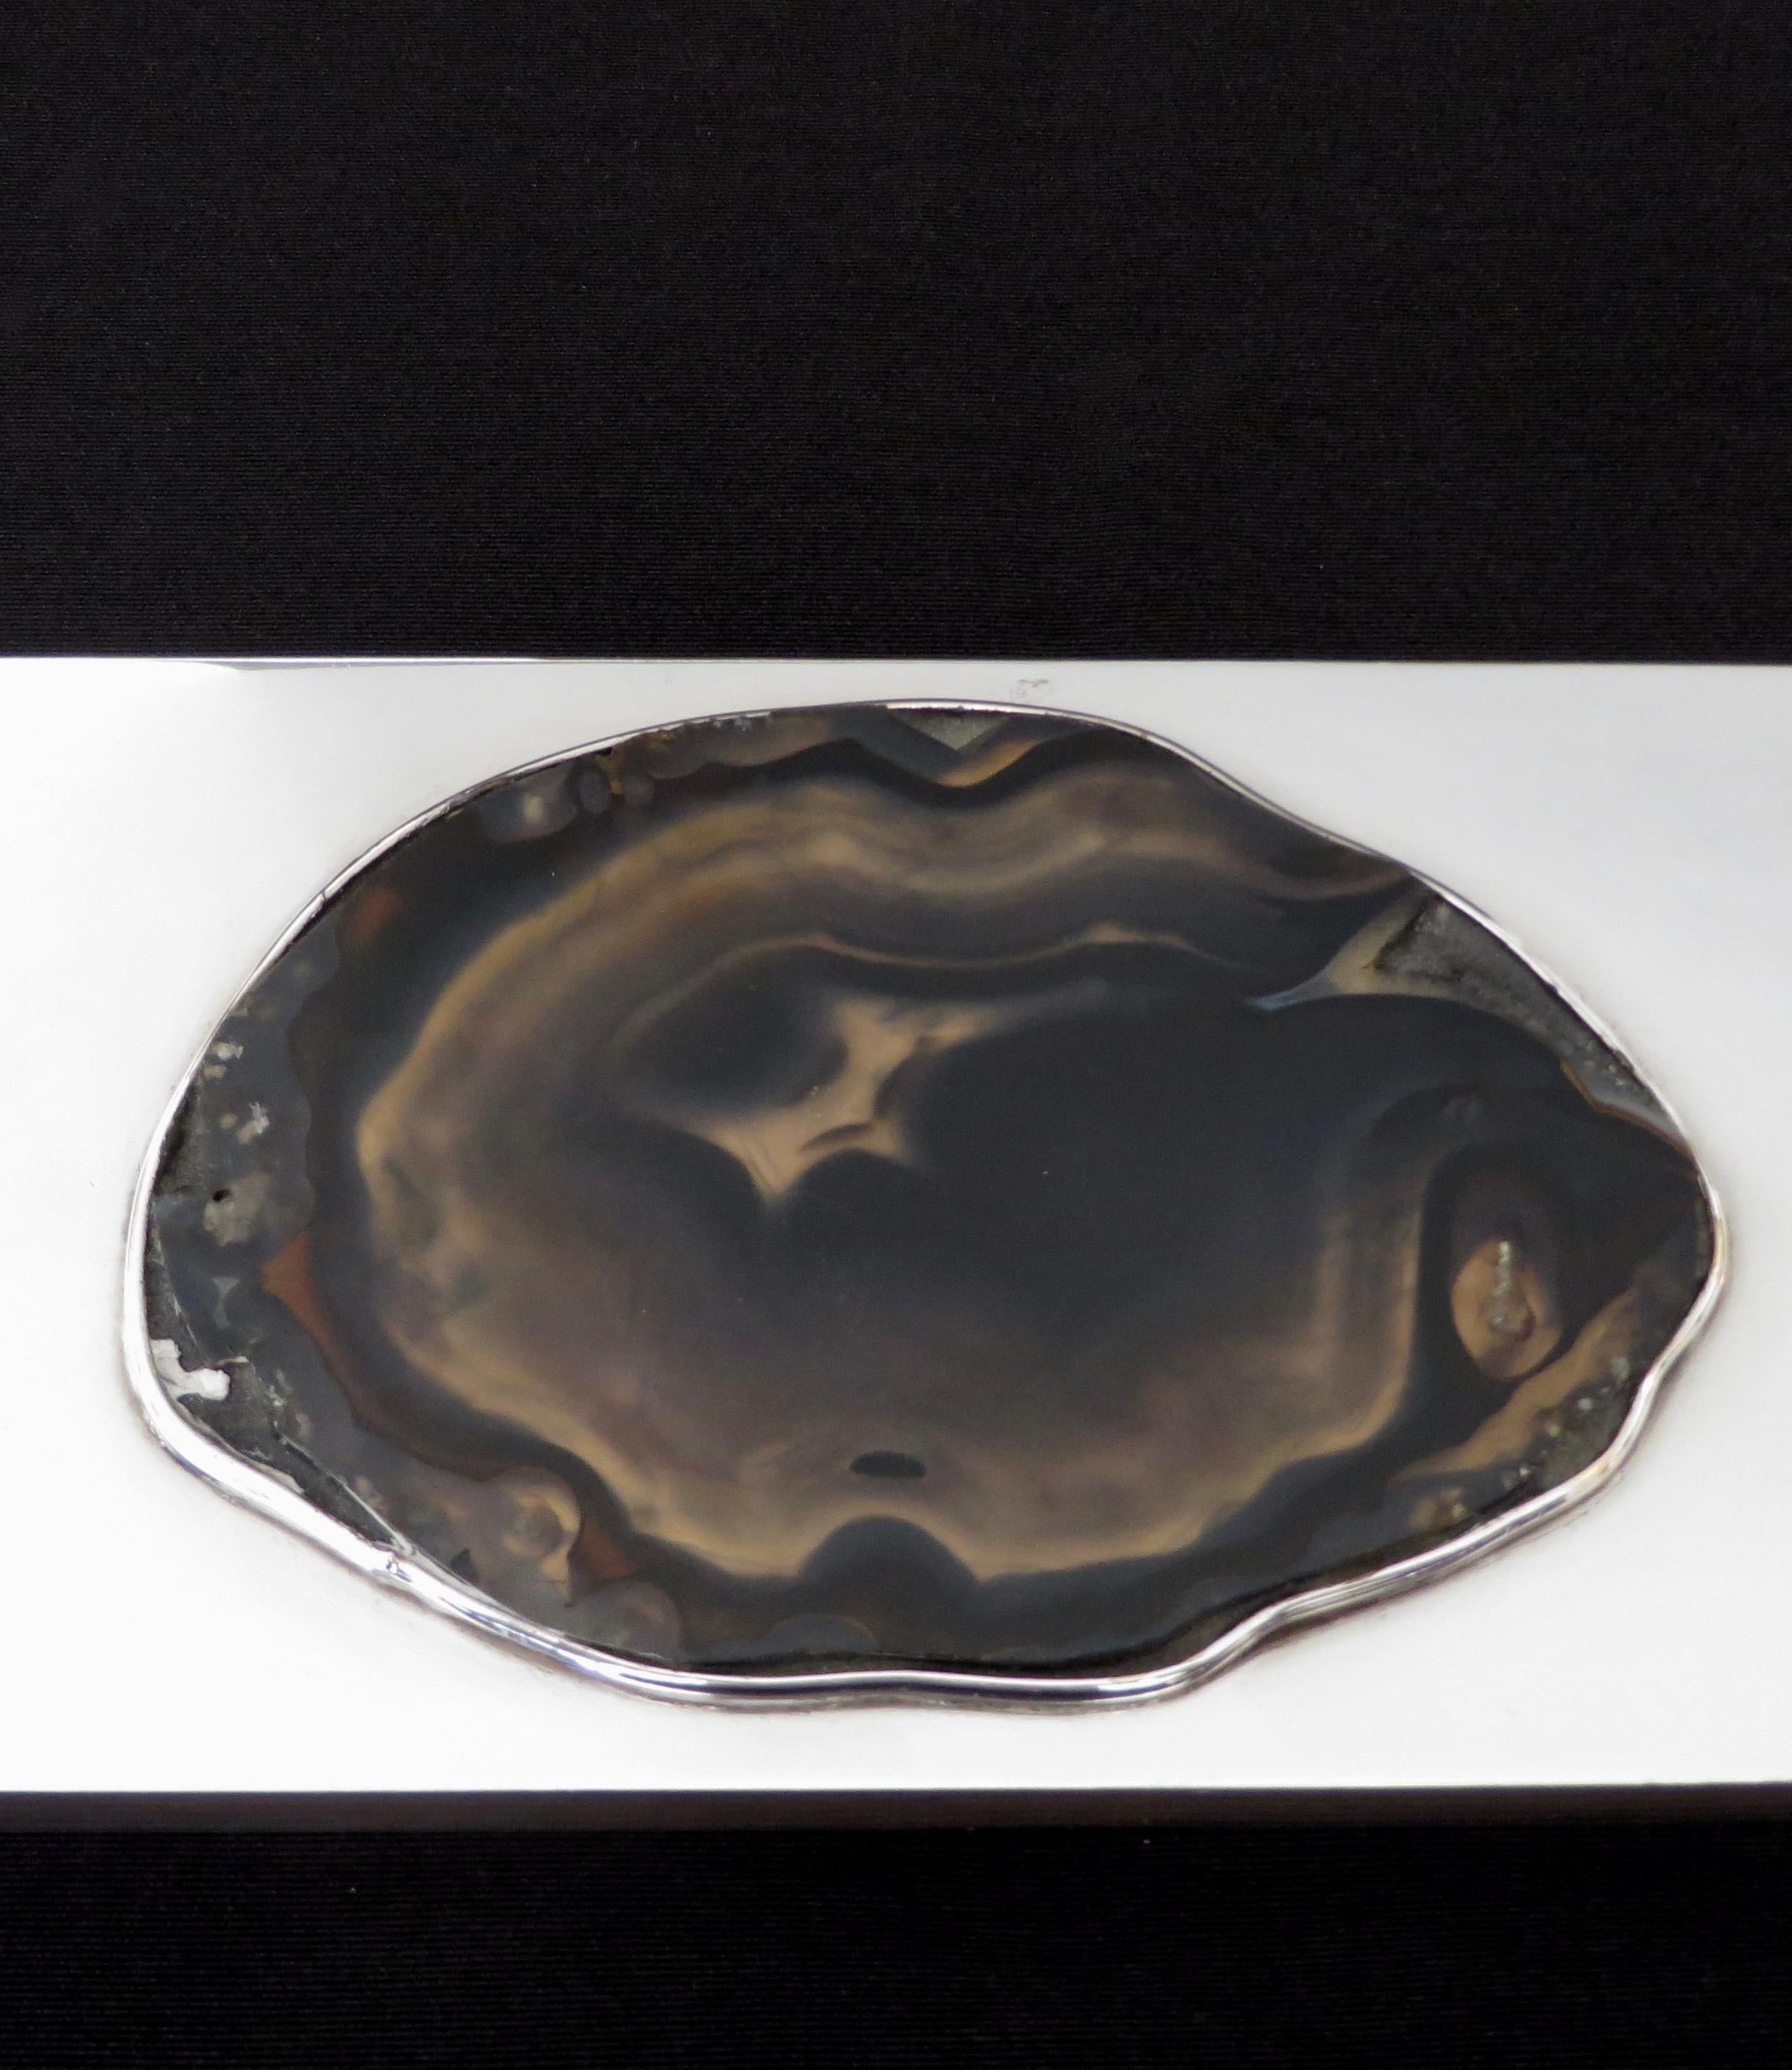 Silverplate and Agate Box Attributed to French Designer Maria Pergay 1